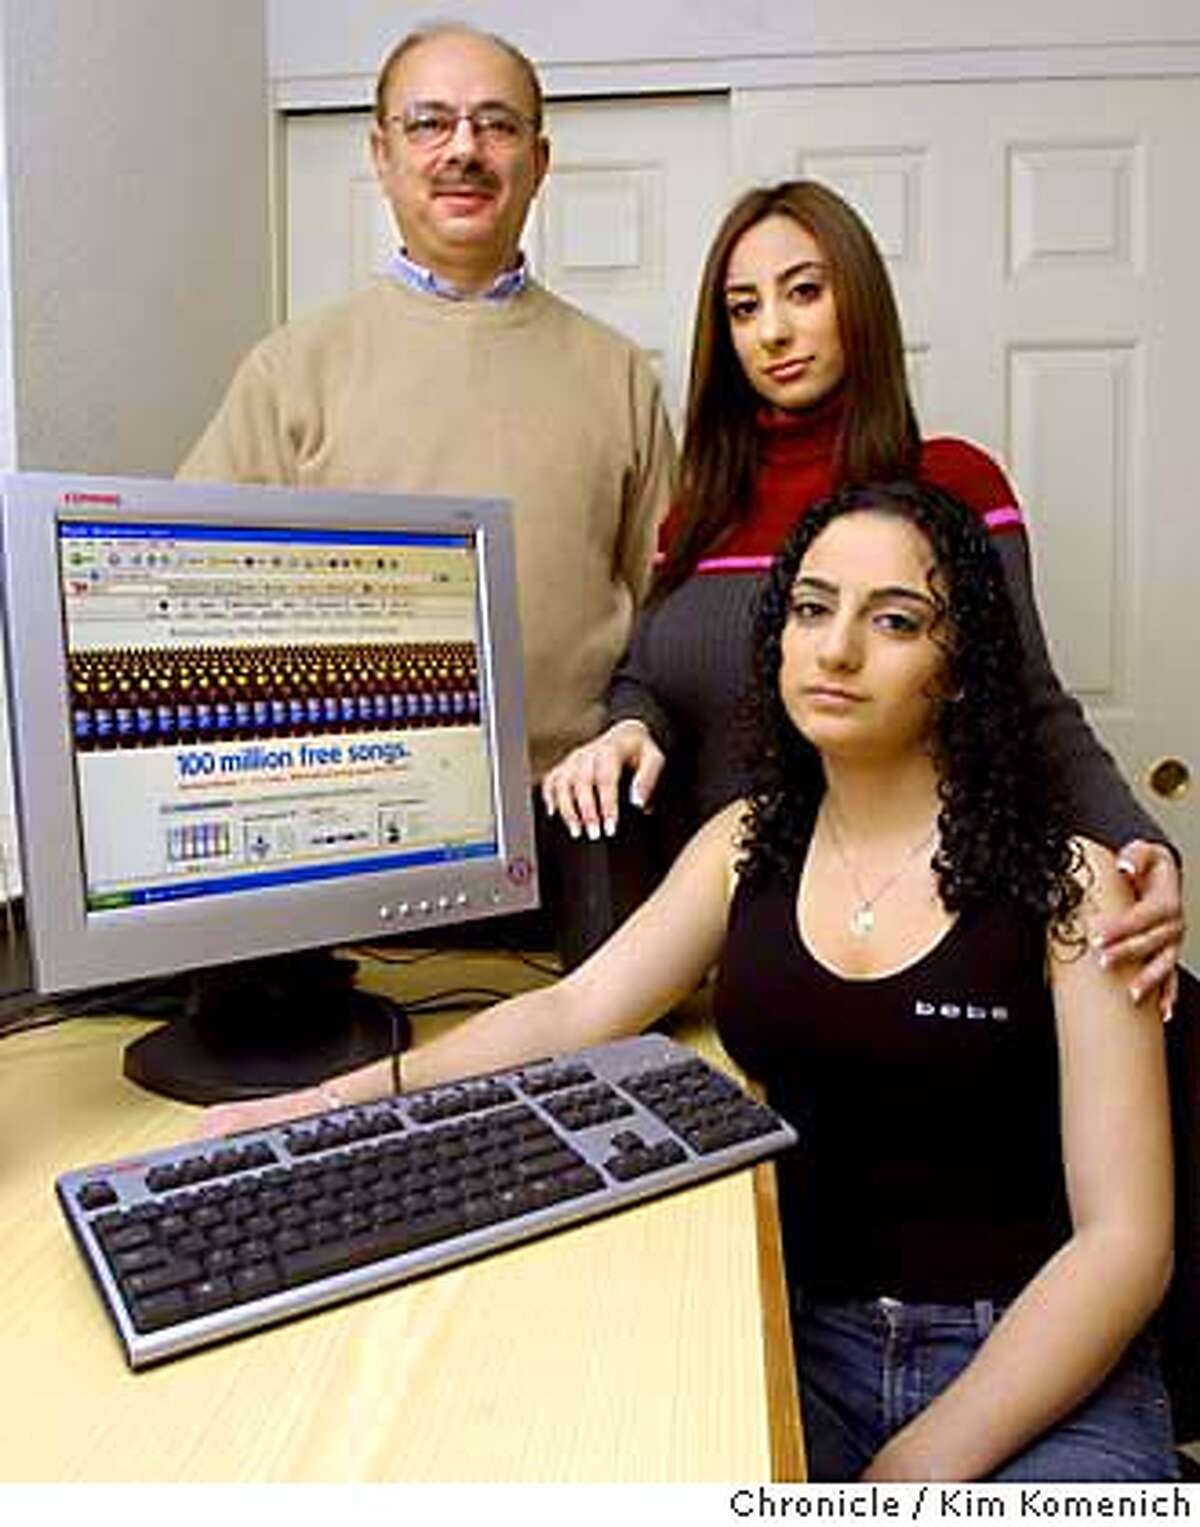 Raymond Maalouf (left) and daughters Kristina (center) and Michelle (seated) of Concord might have to pay the Recording Industry Association of America thousands of dollars after the association sued them for illegal downloading of copyrighted material. Ironically, the girls say they are part of a Pepsi Super Bowl TV ad that touts the Apple "iTunes" music downloading service (seen on the computer screen in this photo.) Photo by KIM KOMENICH/The Chronicle in Concord